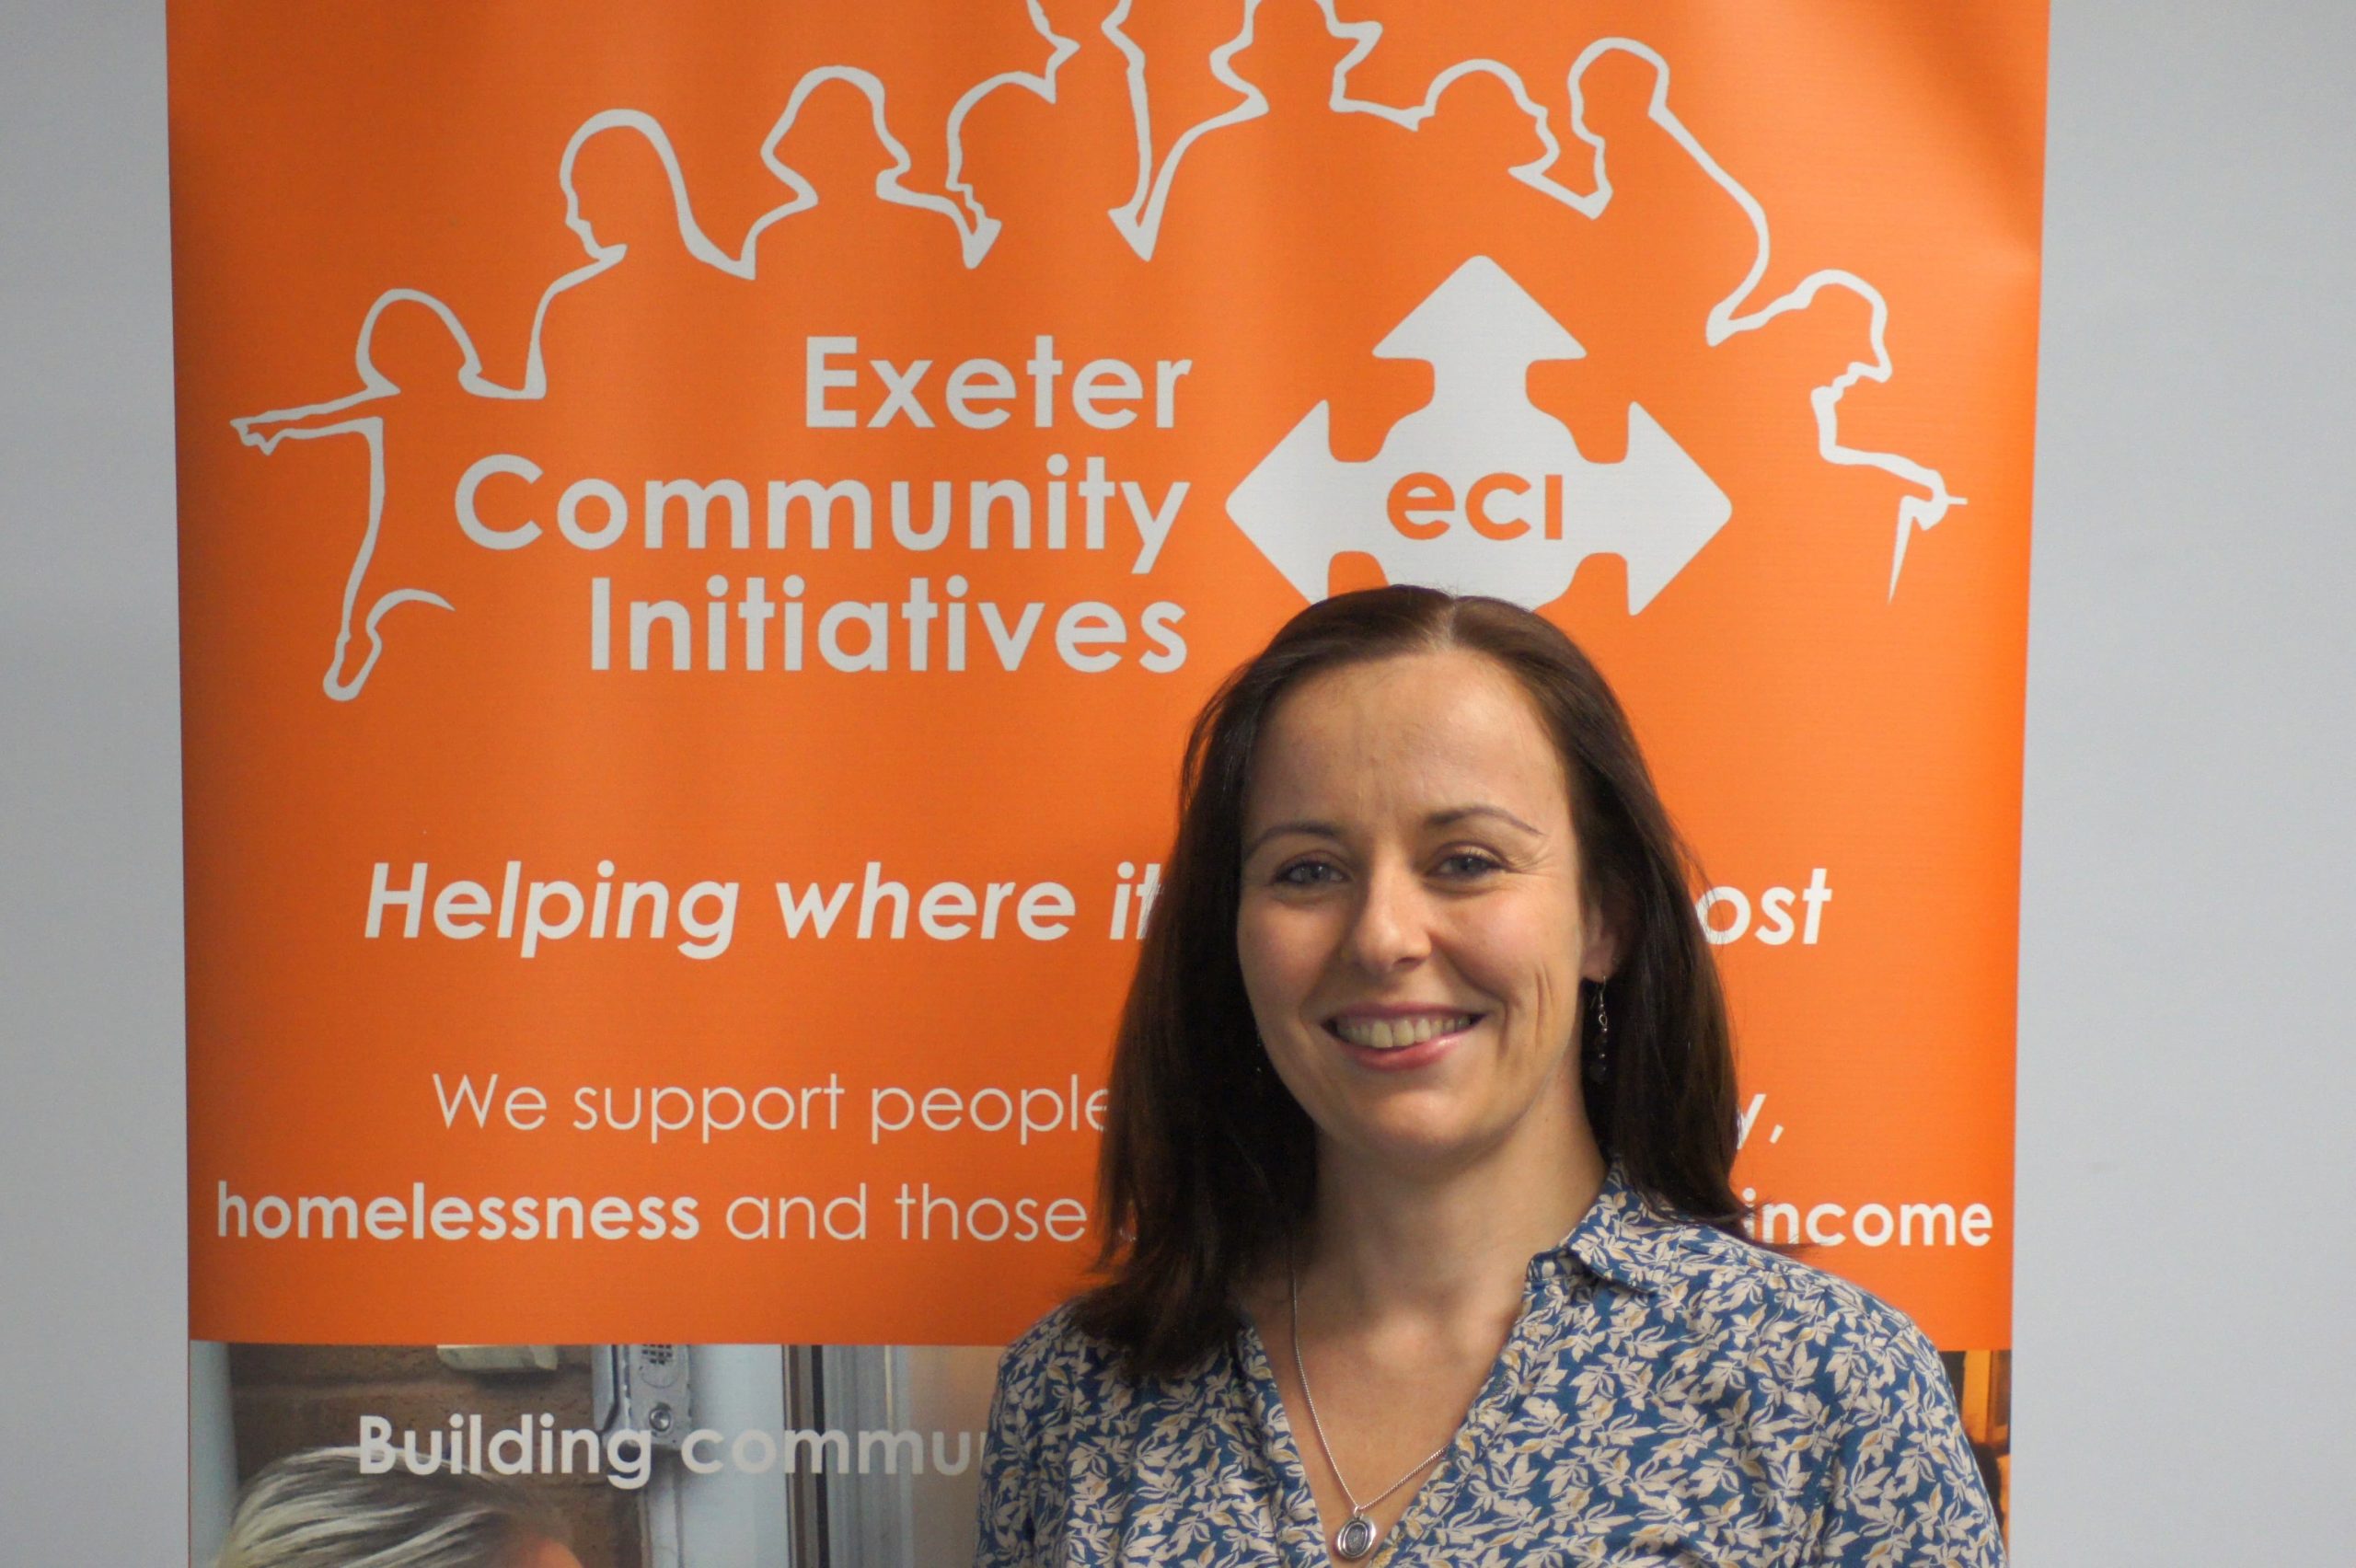 Exeter Community Initiatives appoints new Chief Executive